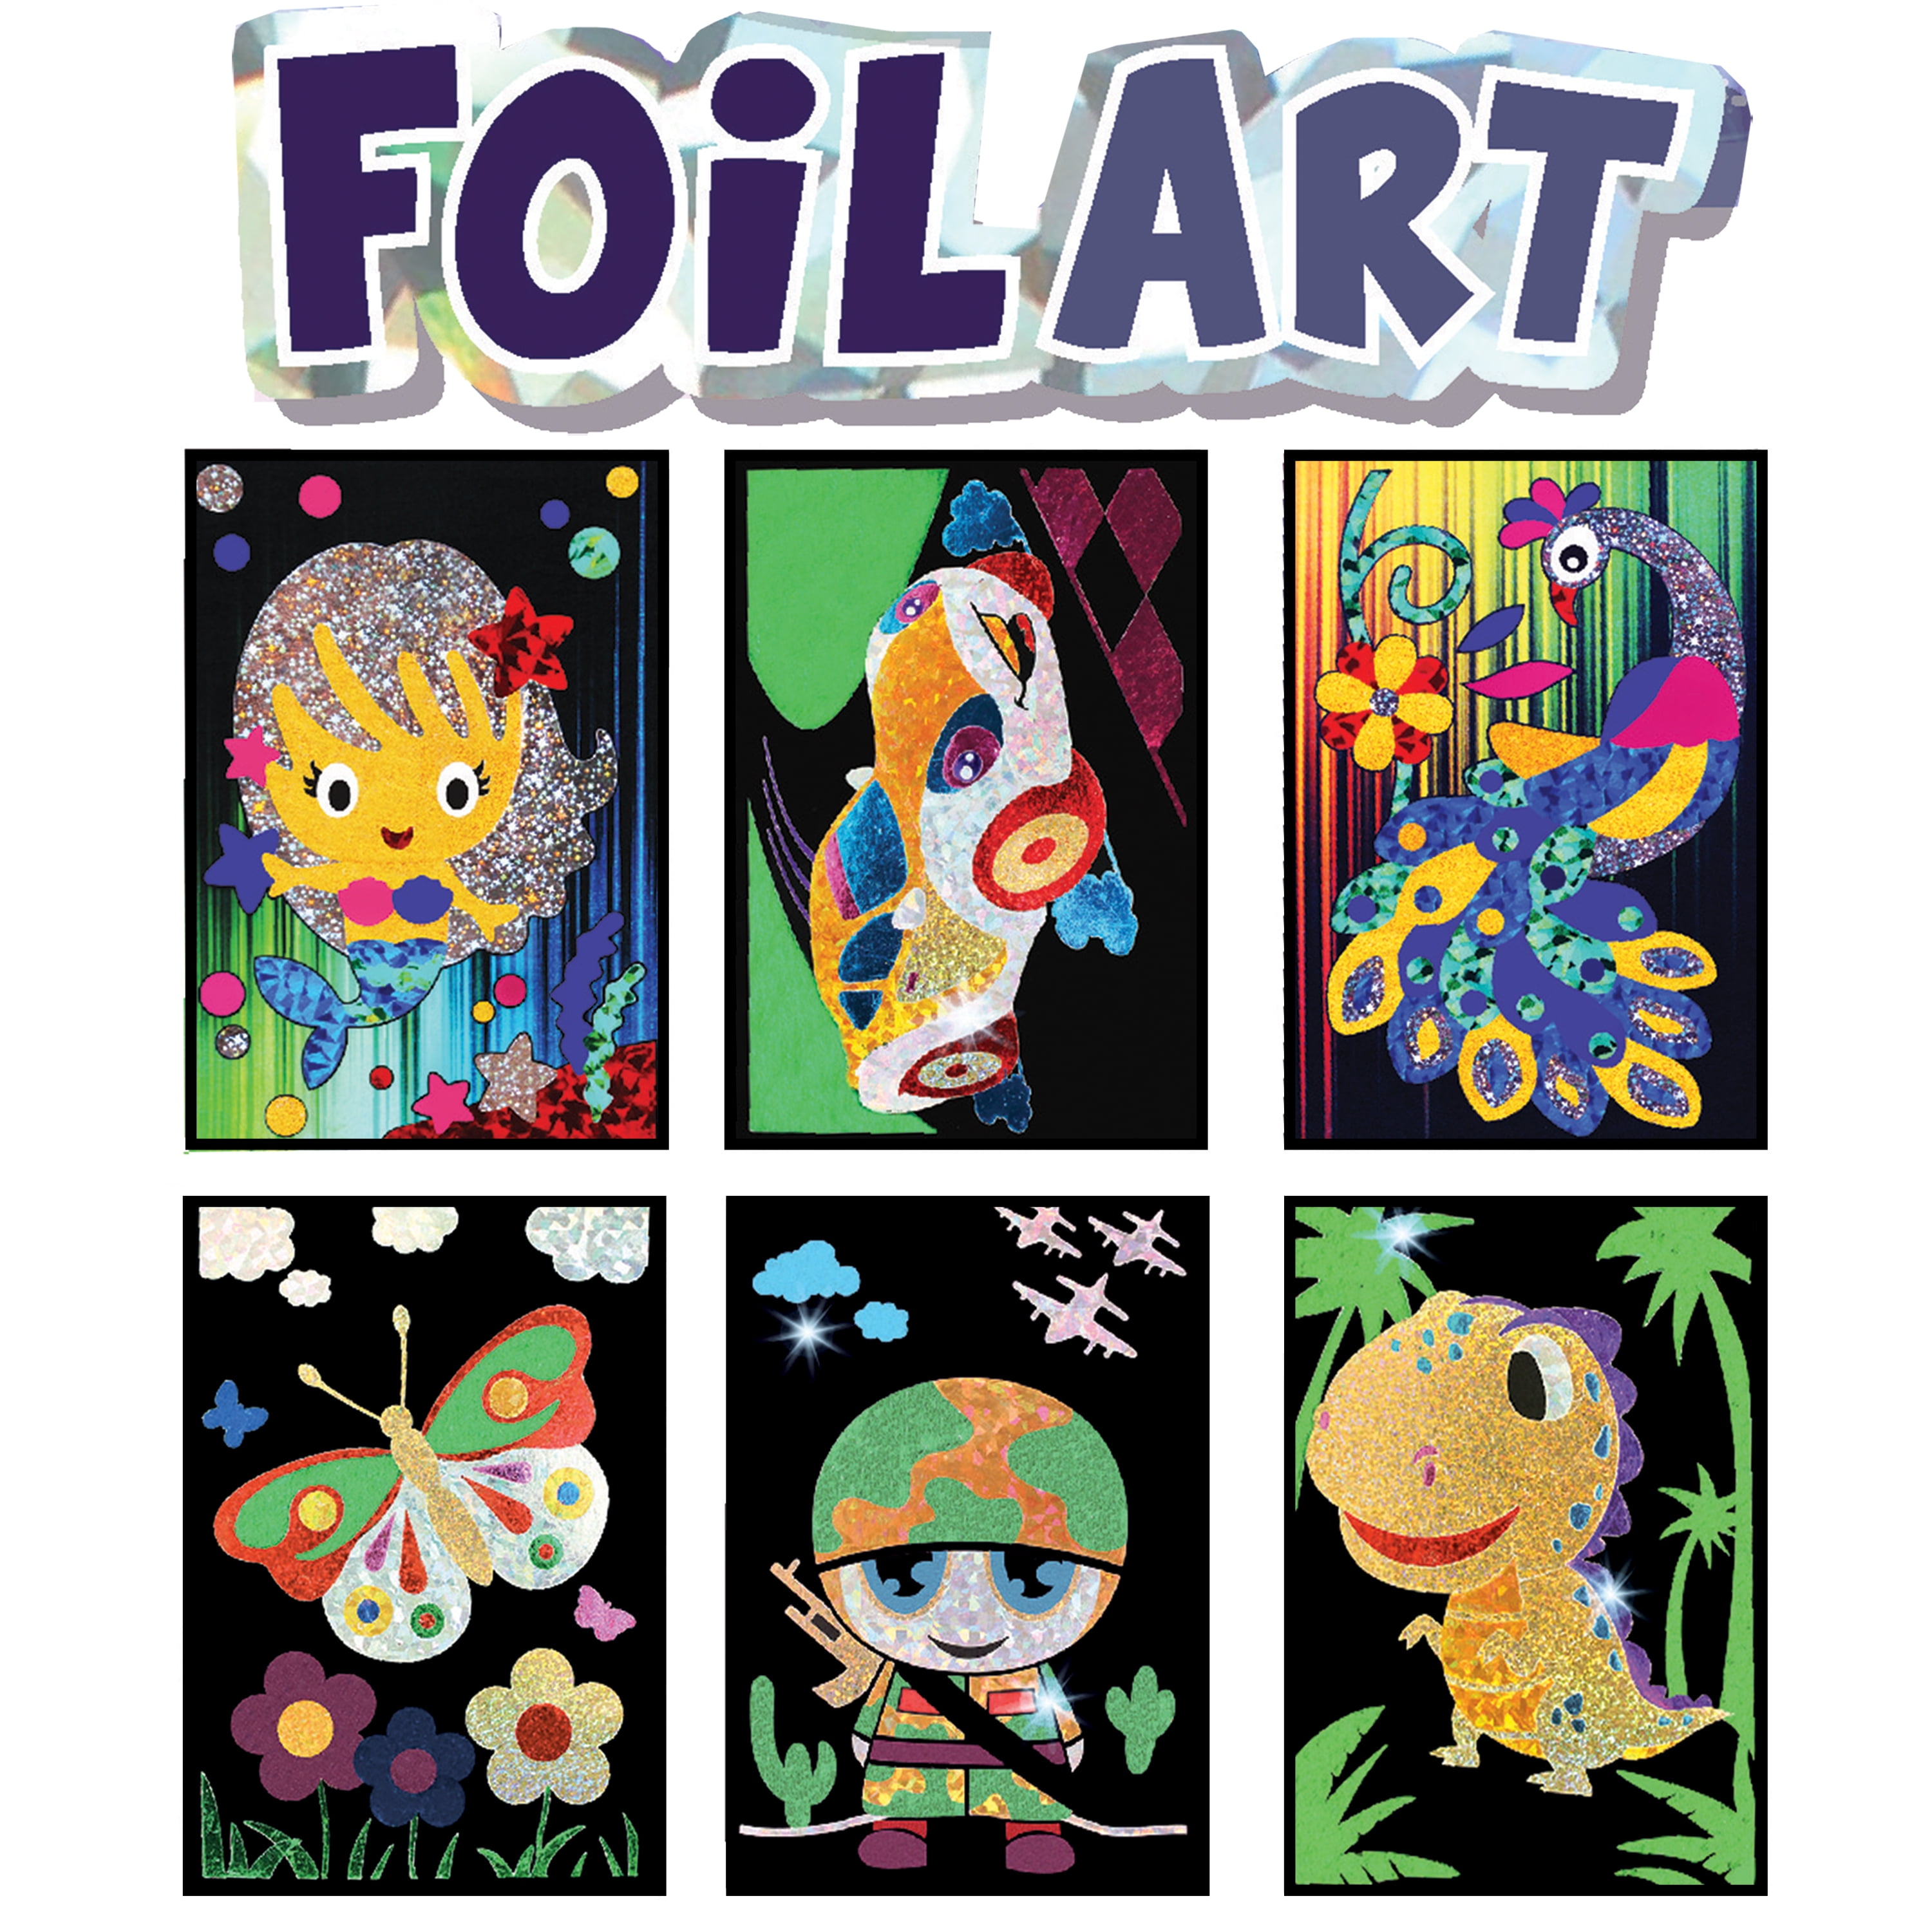 VHALE Foil Art Craft Kit Sticker Picture, Peel and Paste Sparkly Foil Art,  Classroom Arts and Crafts, 6 Packs 